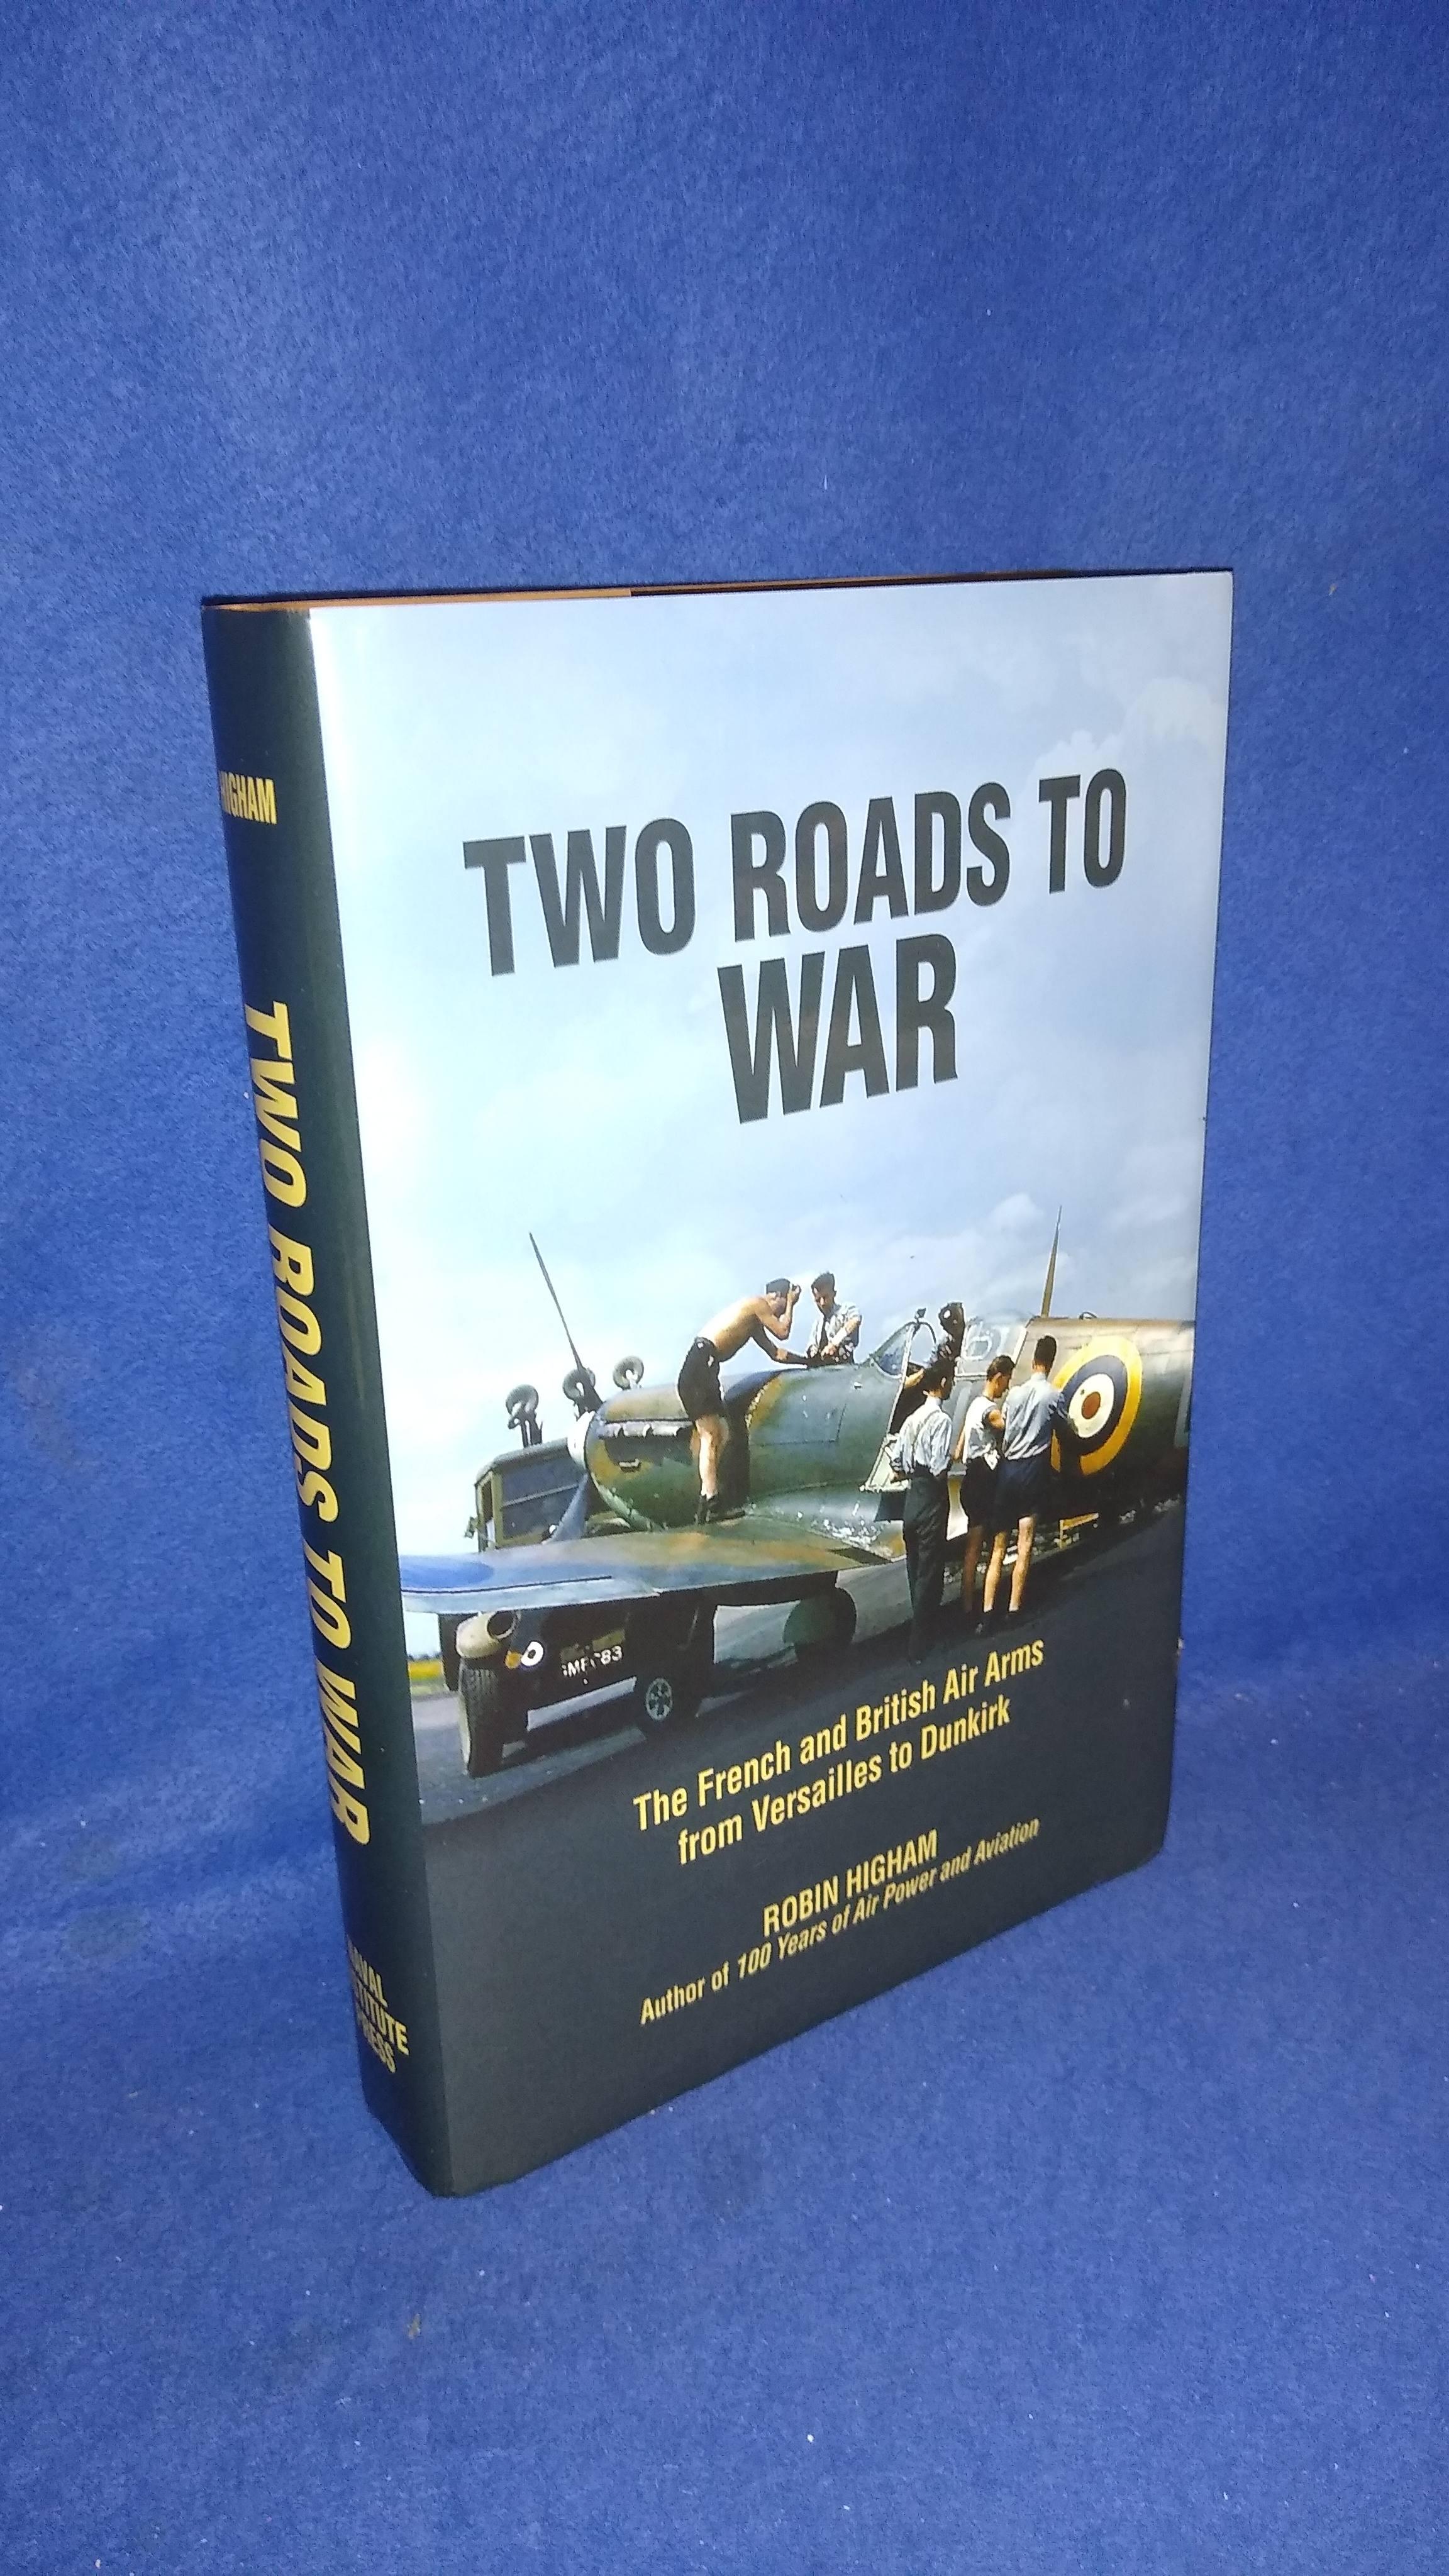 Two Roads To War. The French and British air arms from Versailles to Dunkirk.